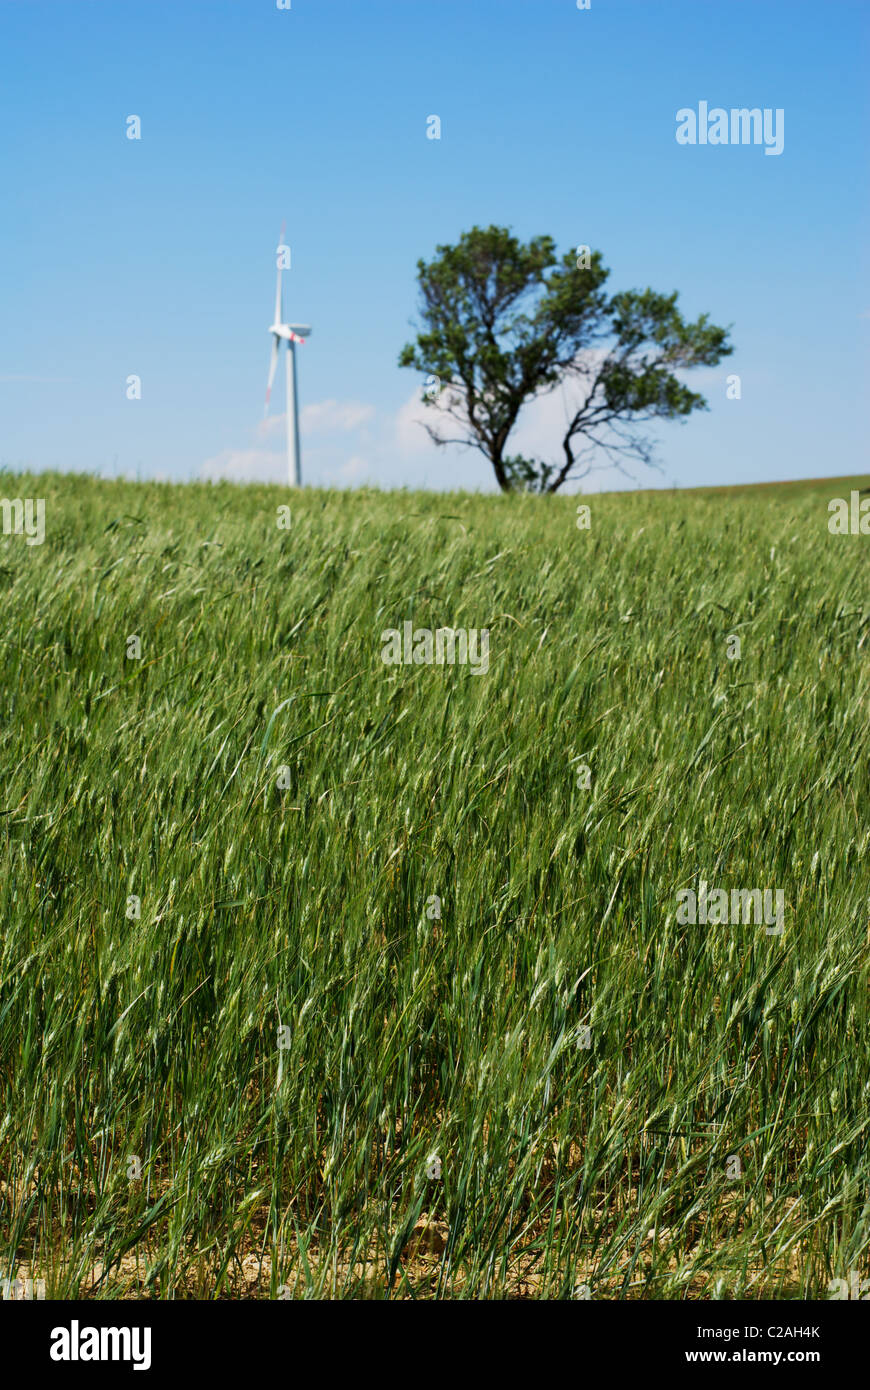 Young wheat plants with wind turbine and tree in background (shallow focus on wheat in foreground) Stock Photo